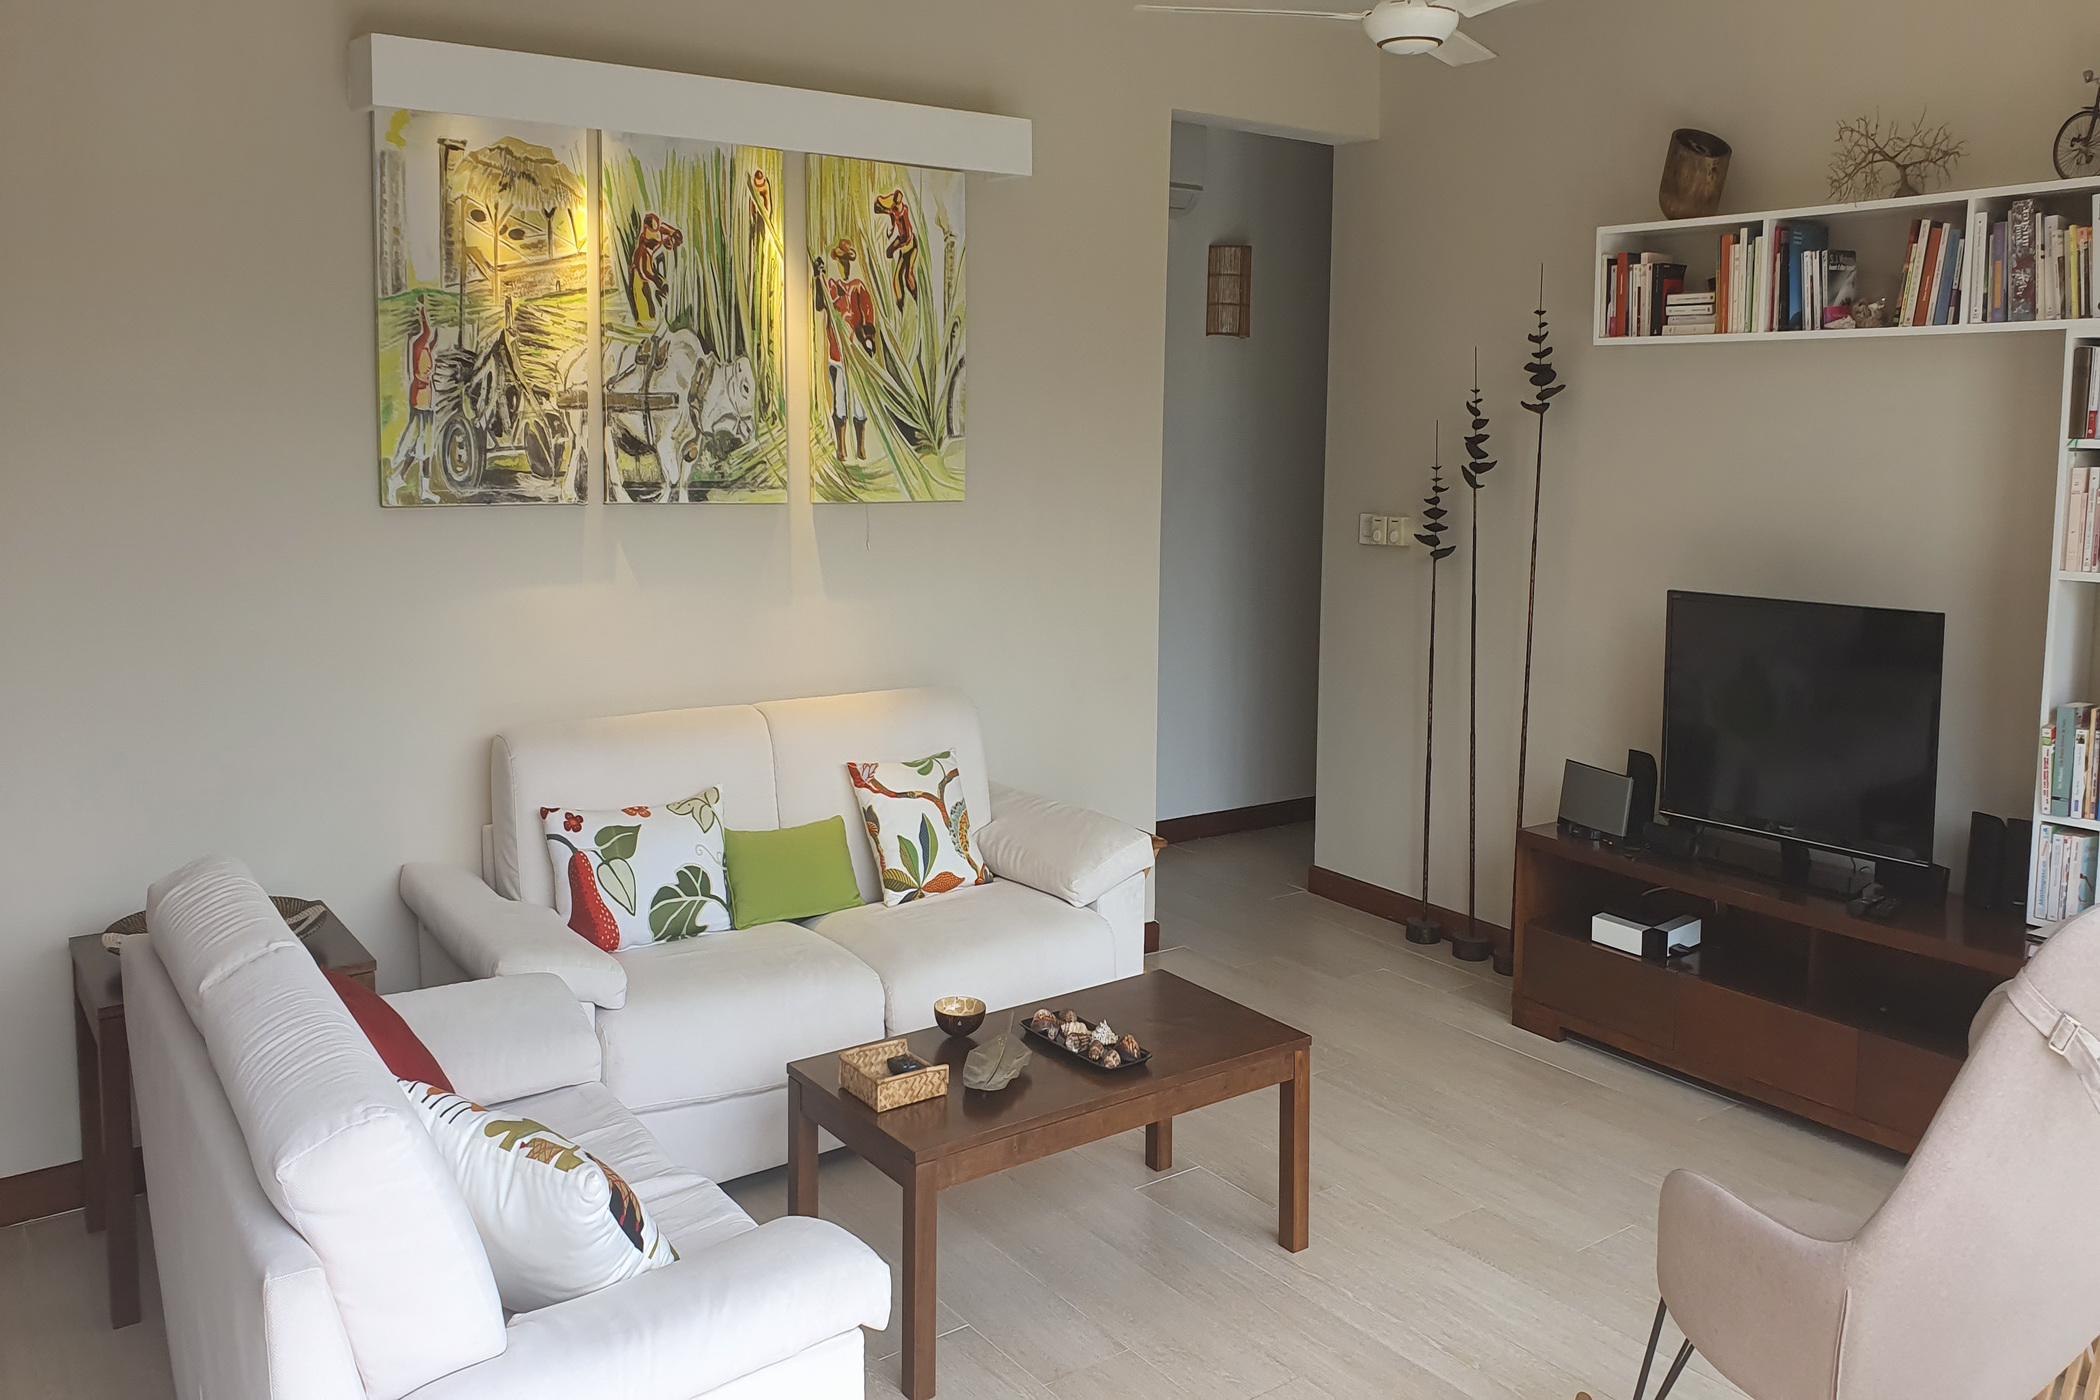 3 bedroom penthouse apartment for sale in Black River (Mauritius)